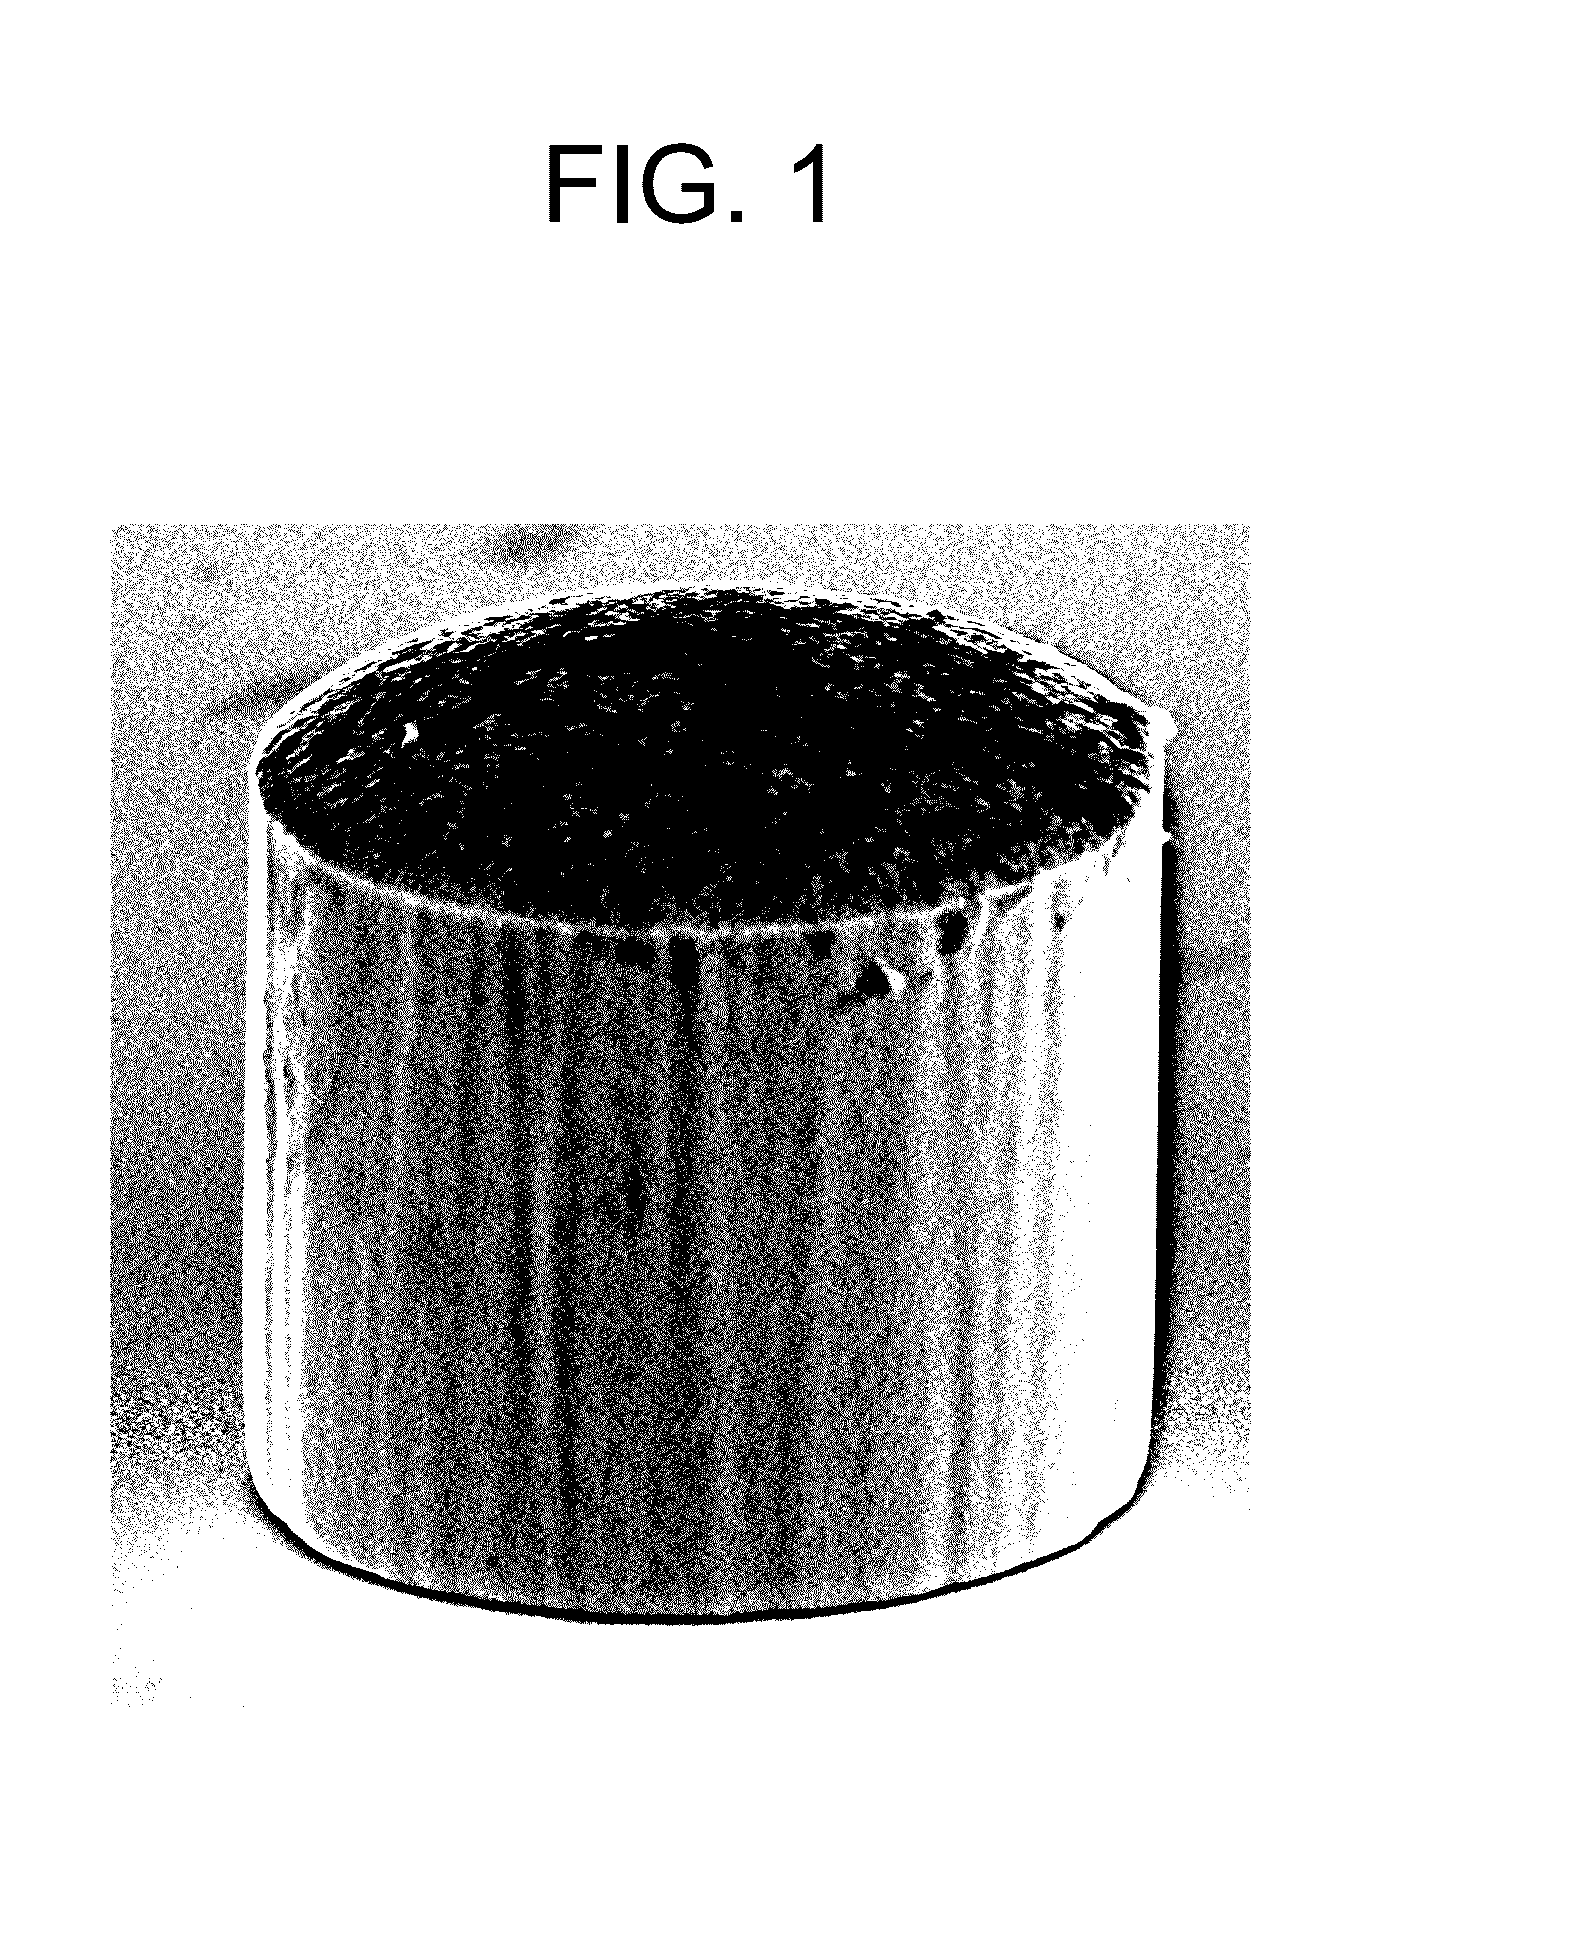 Method of electroplating photoresist defined features from copper electroplating baths containing reaction products of imidazole compounds, bisepoxides and halobenzyl compounds